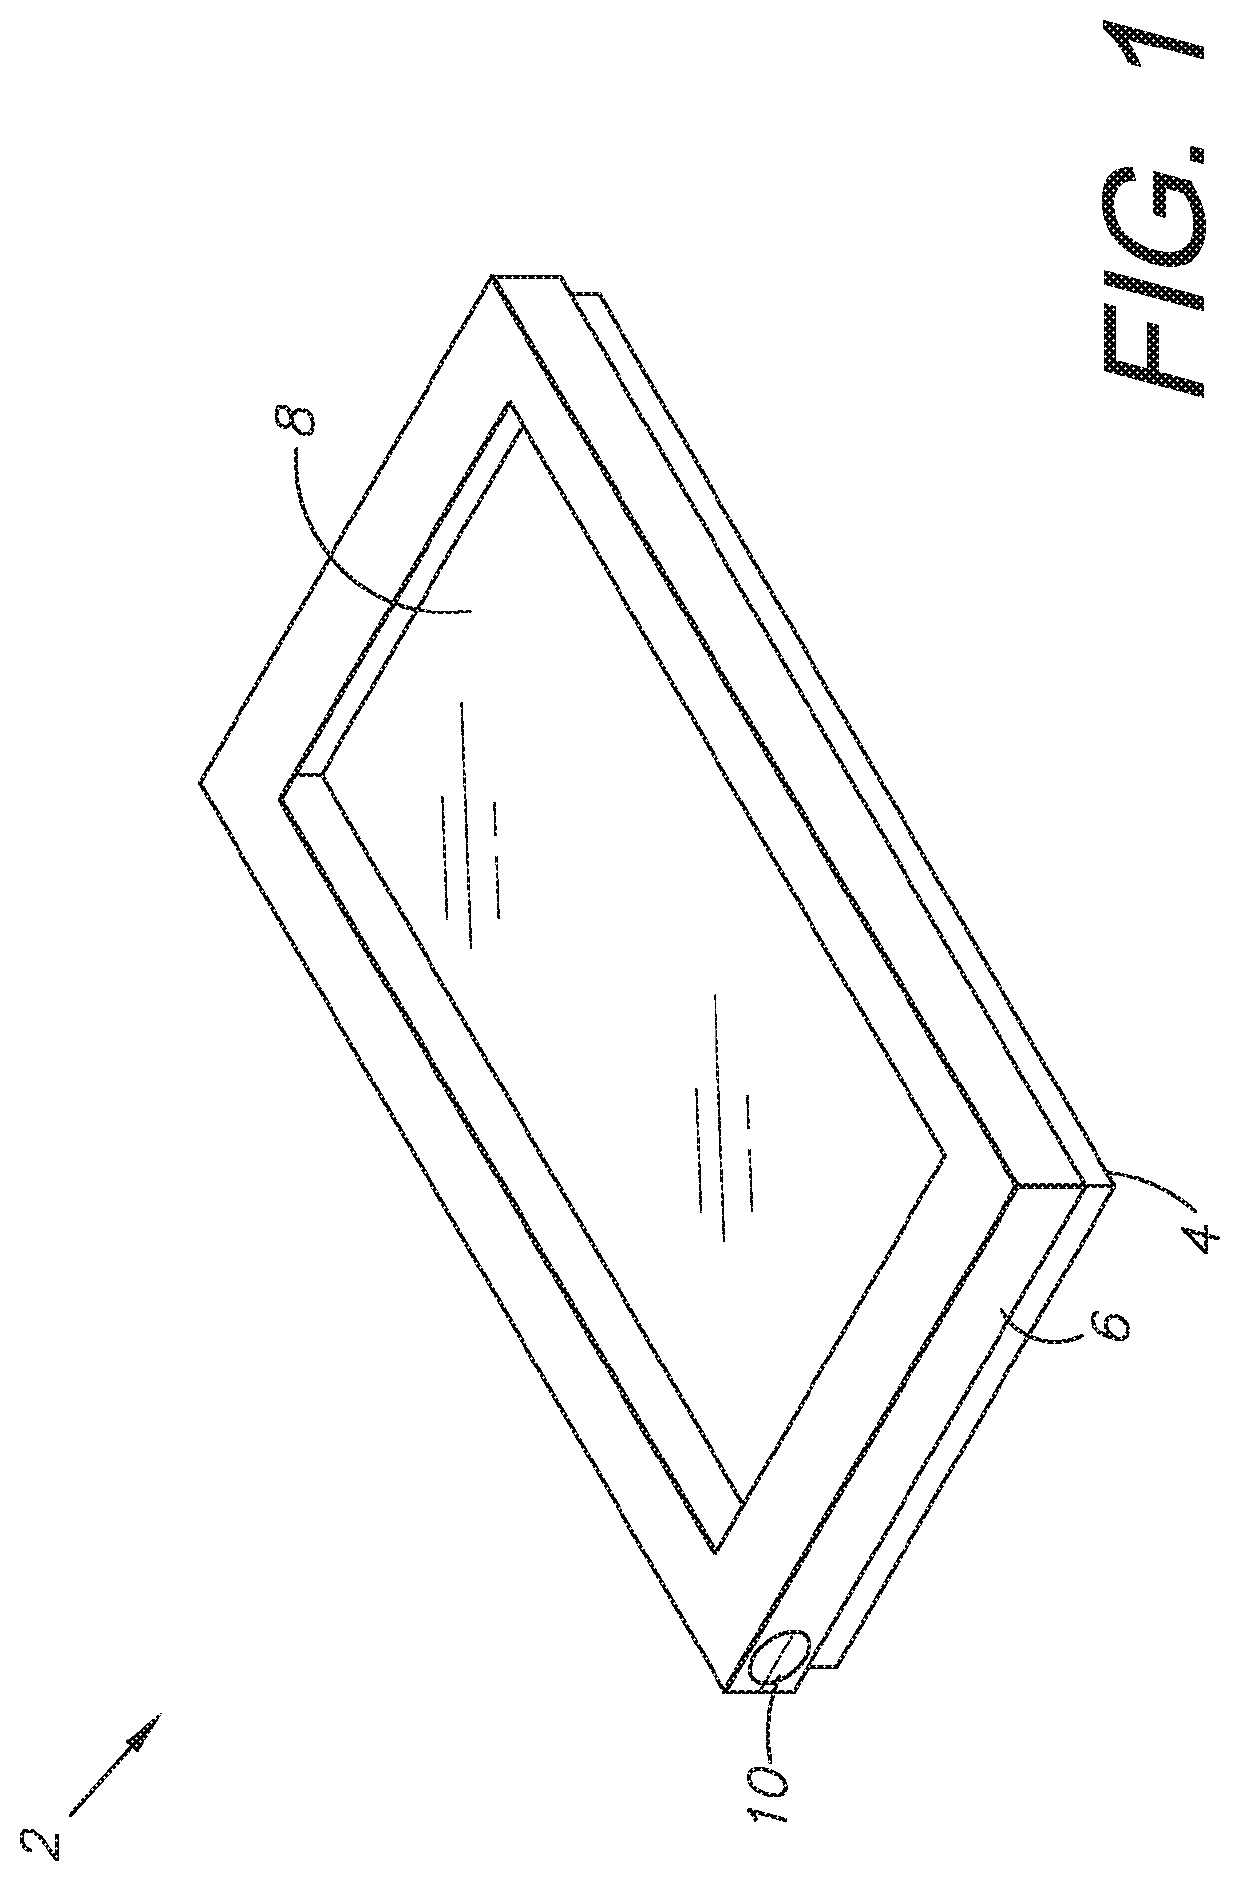 Adjustable phone lens accessory and method of use